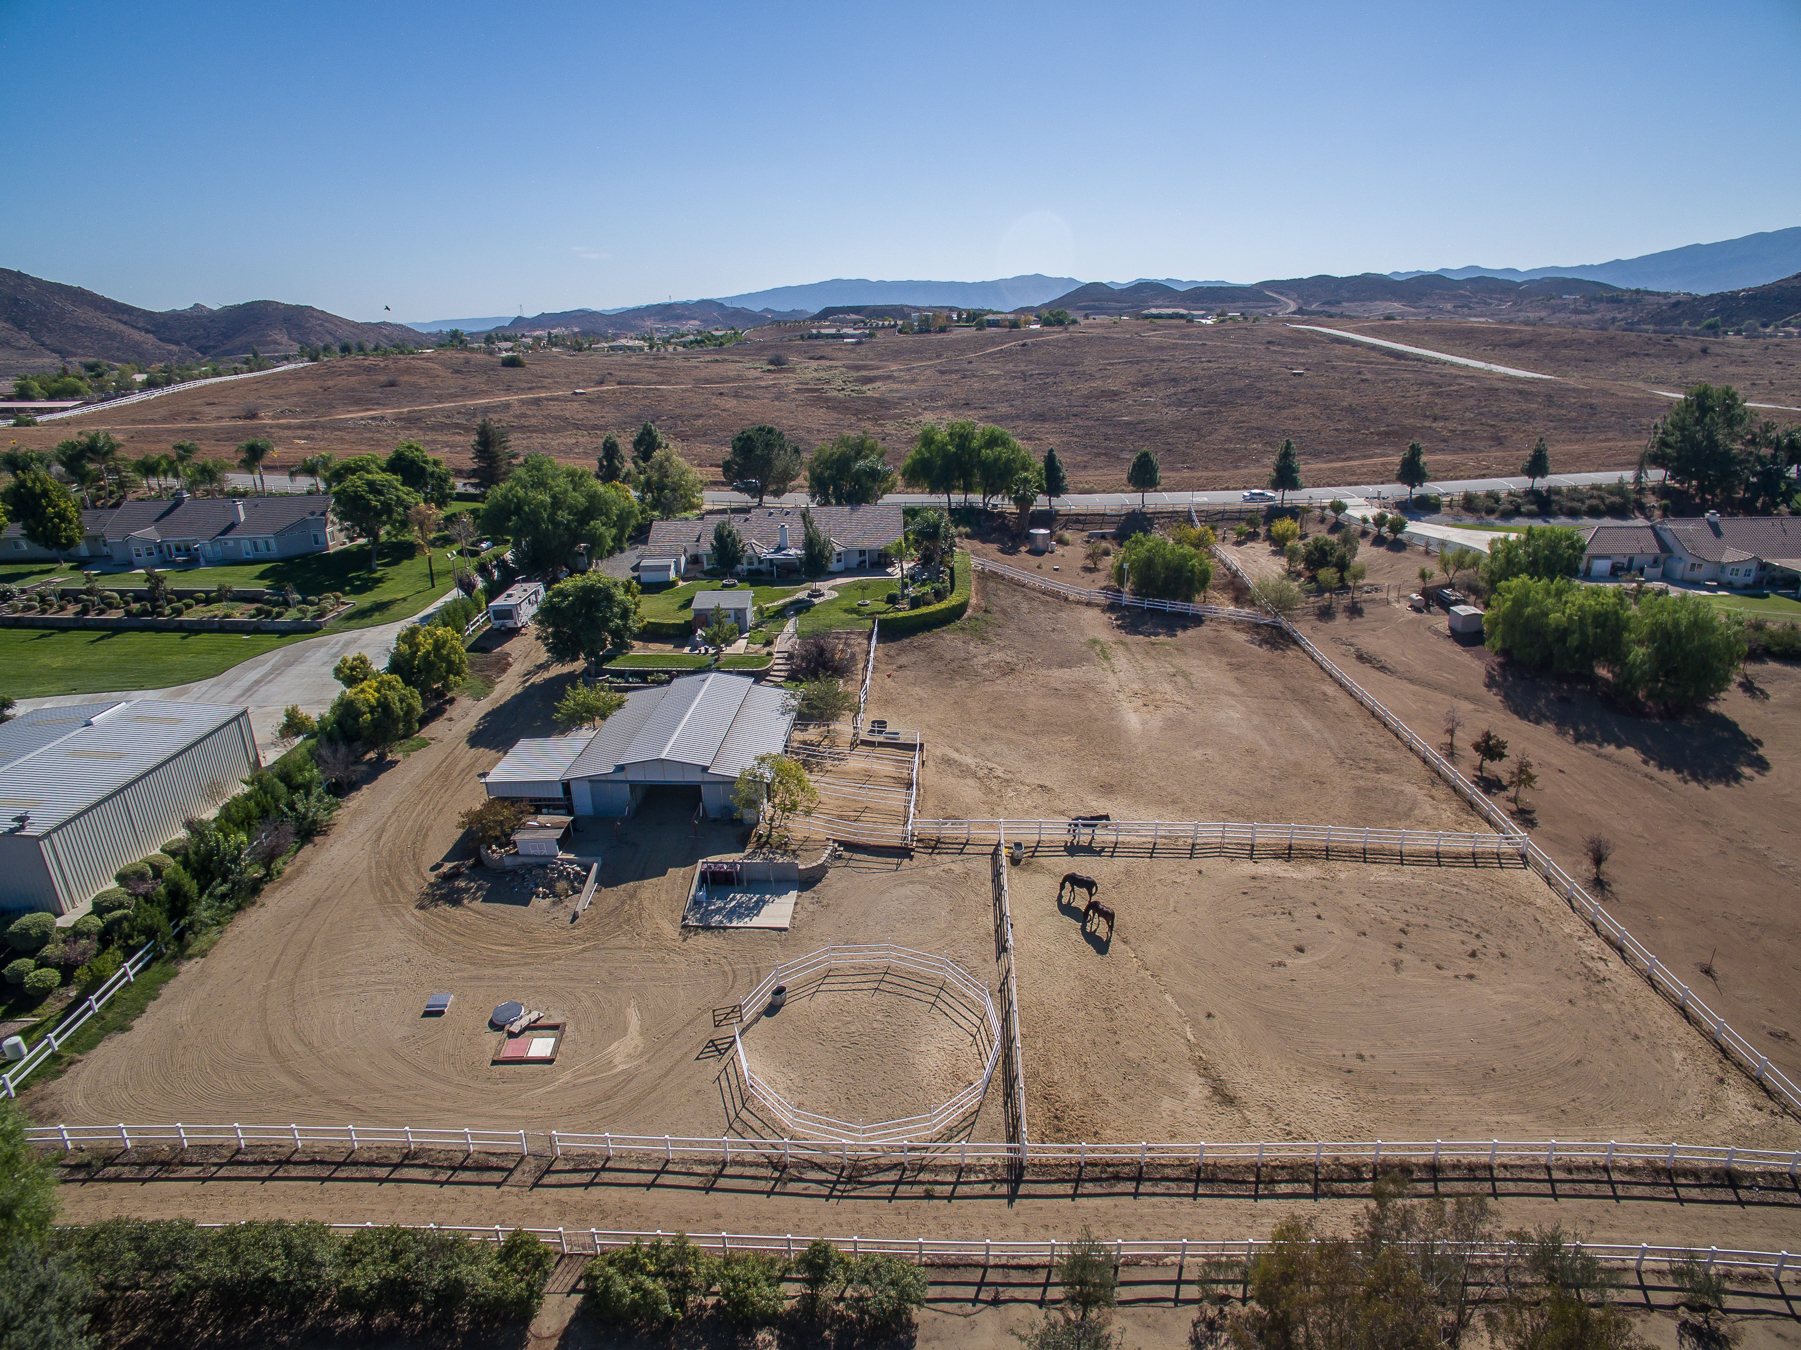 Listed & Sold by Denise Gentile Coldwell Banker Associated Brokers Realty- Beautiful Equestrian Property 2.32 Acres in Gavilan Hills Estates.  Call Denise if you would like the same results! 951-751-1311.